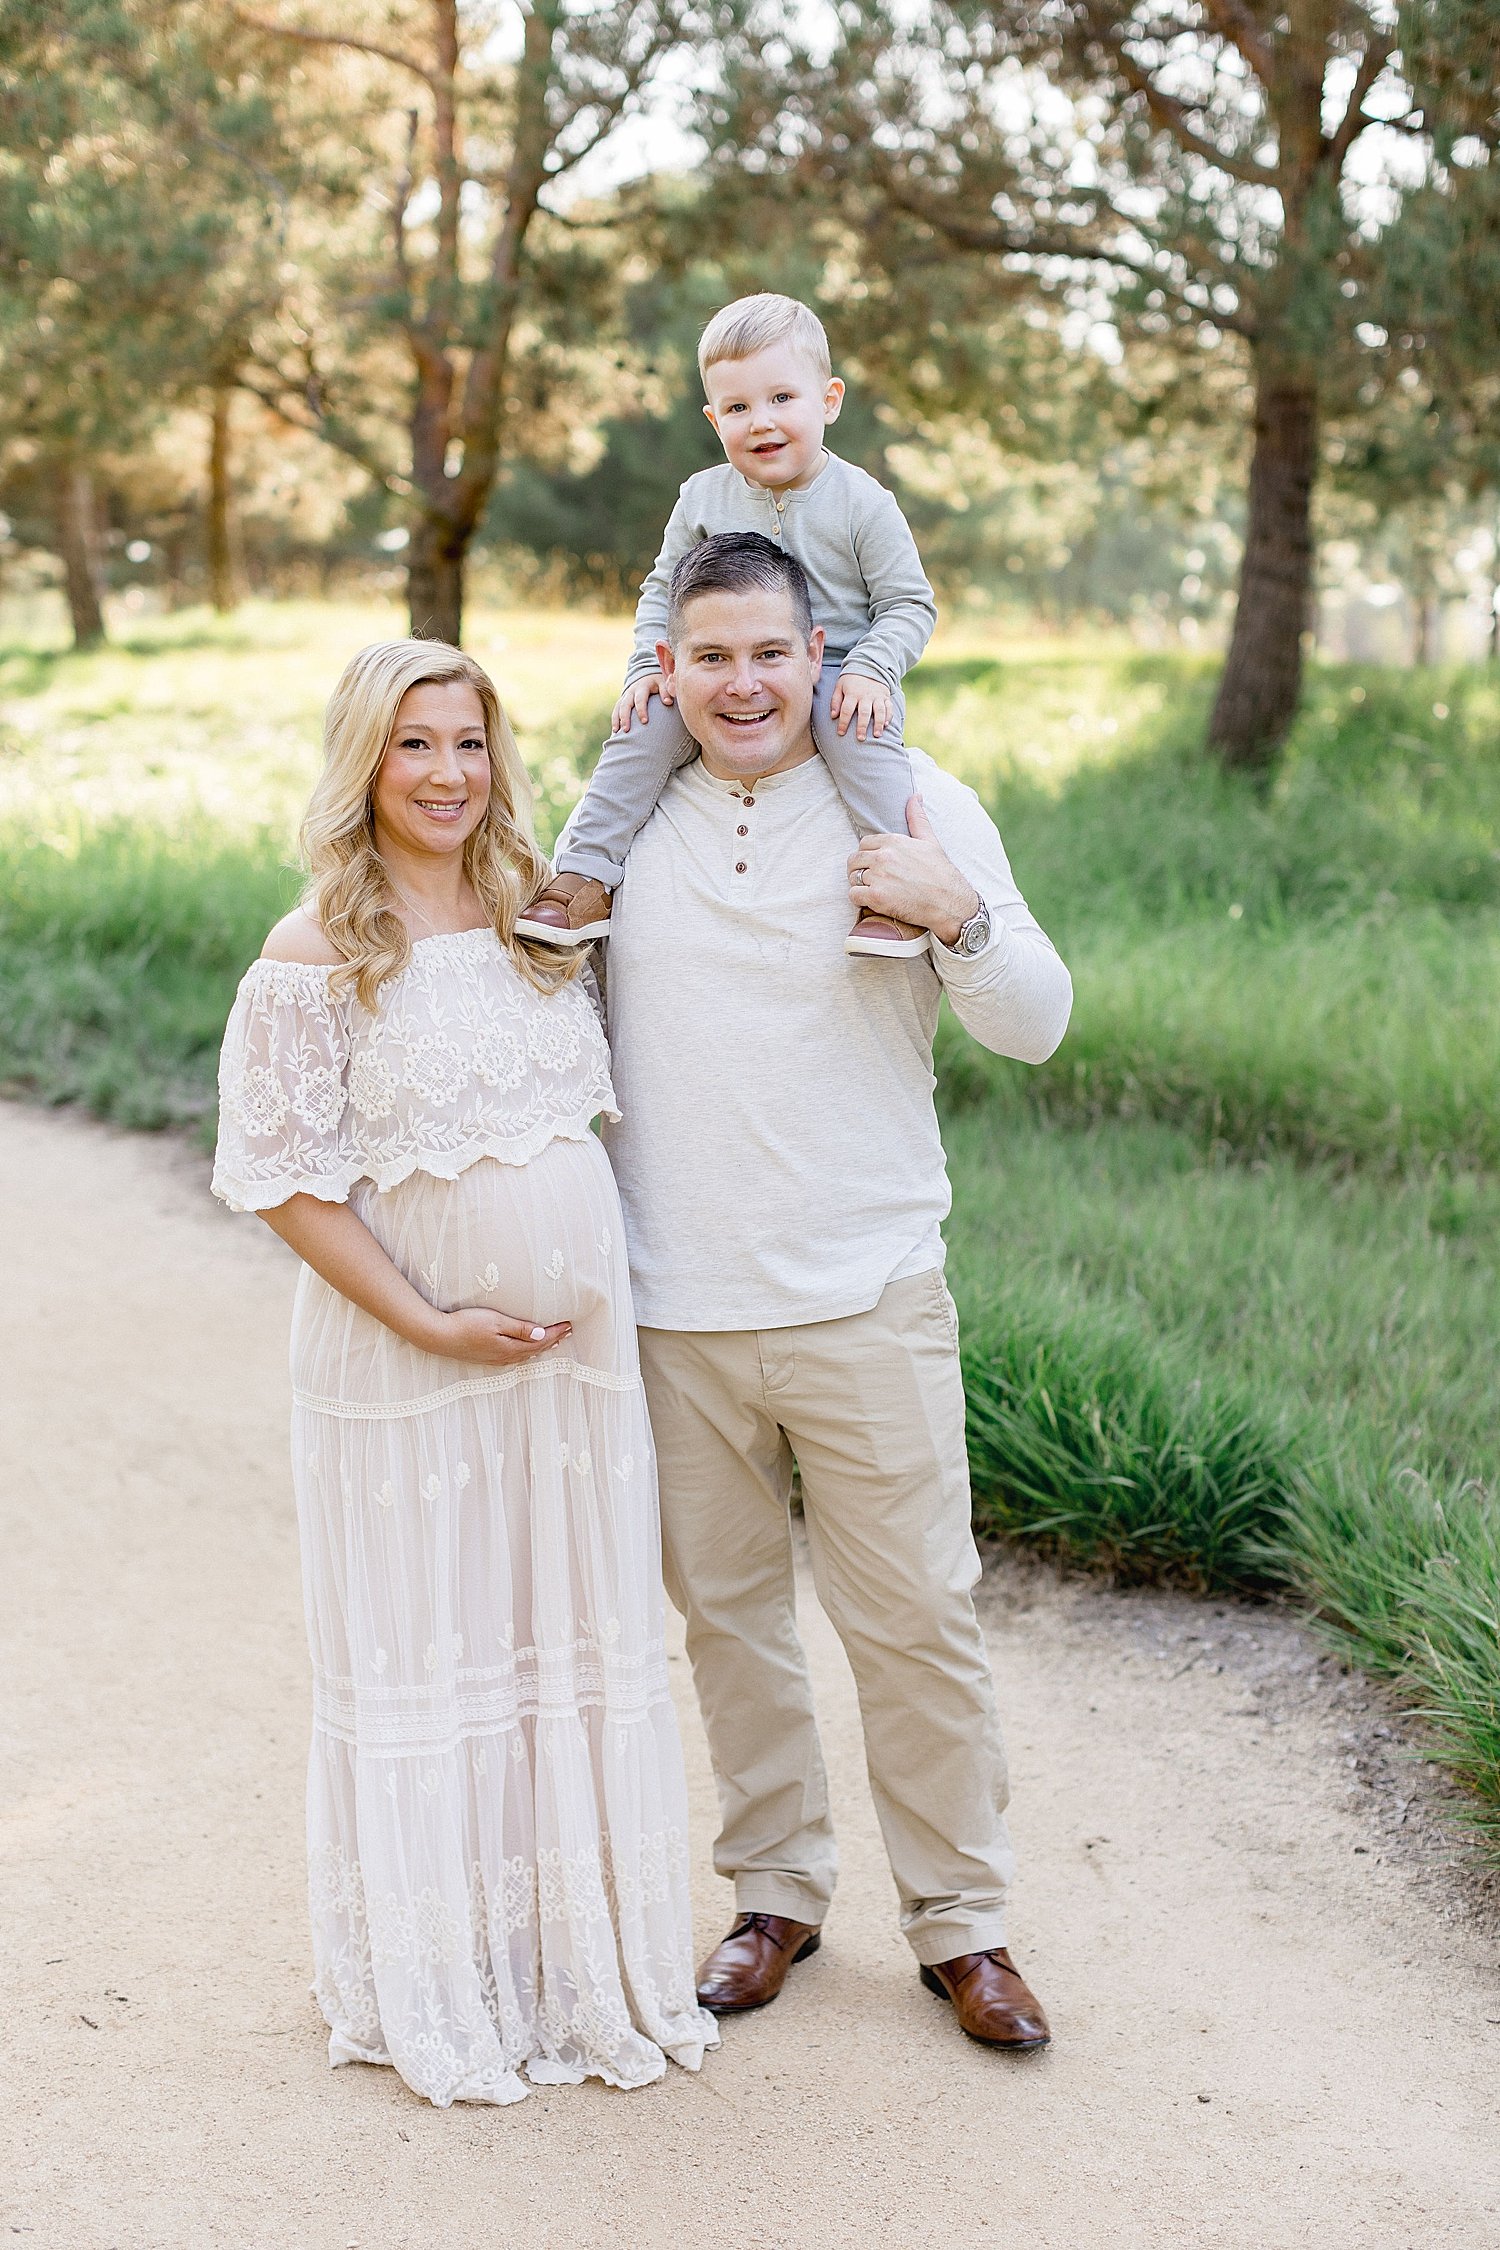 Outdoor maternity session in Orange County, CA | Ambre Williams Photography